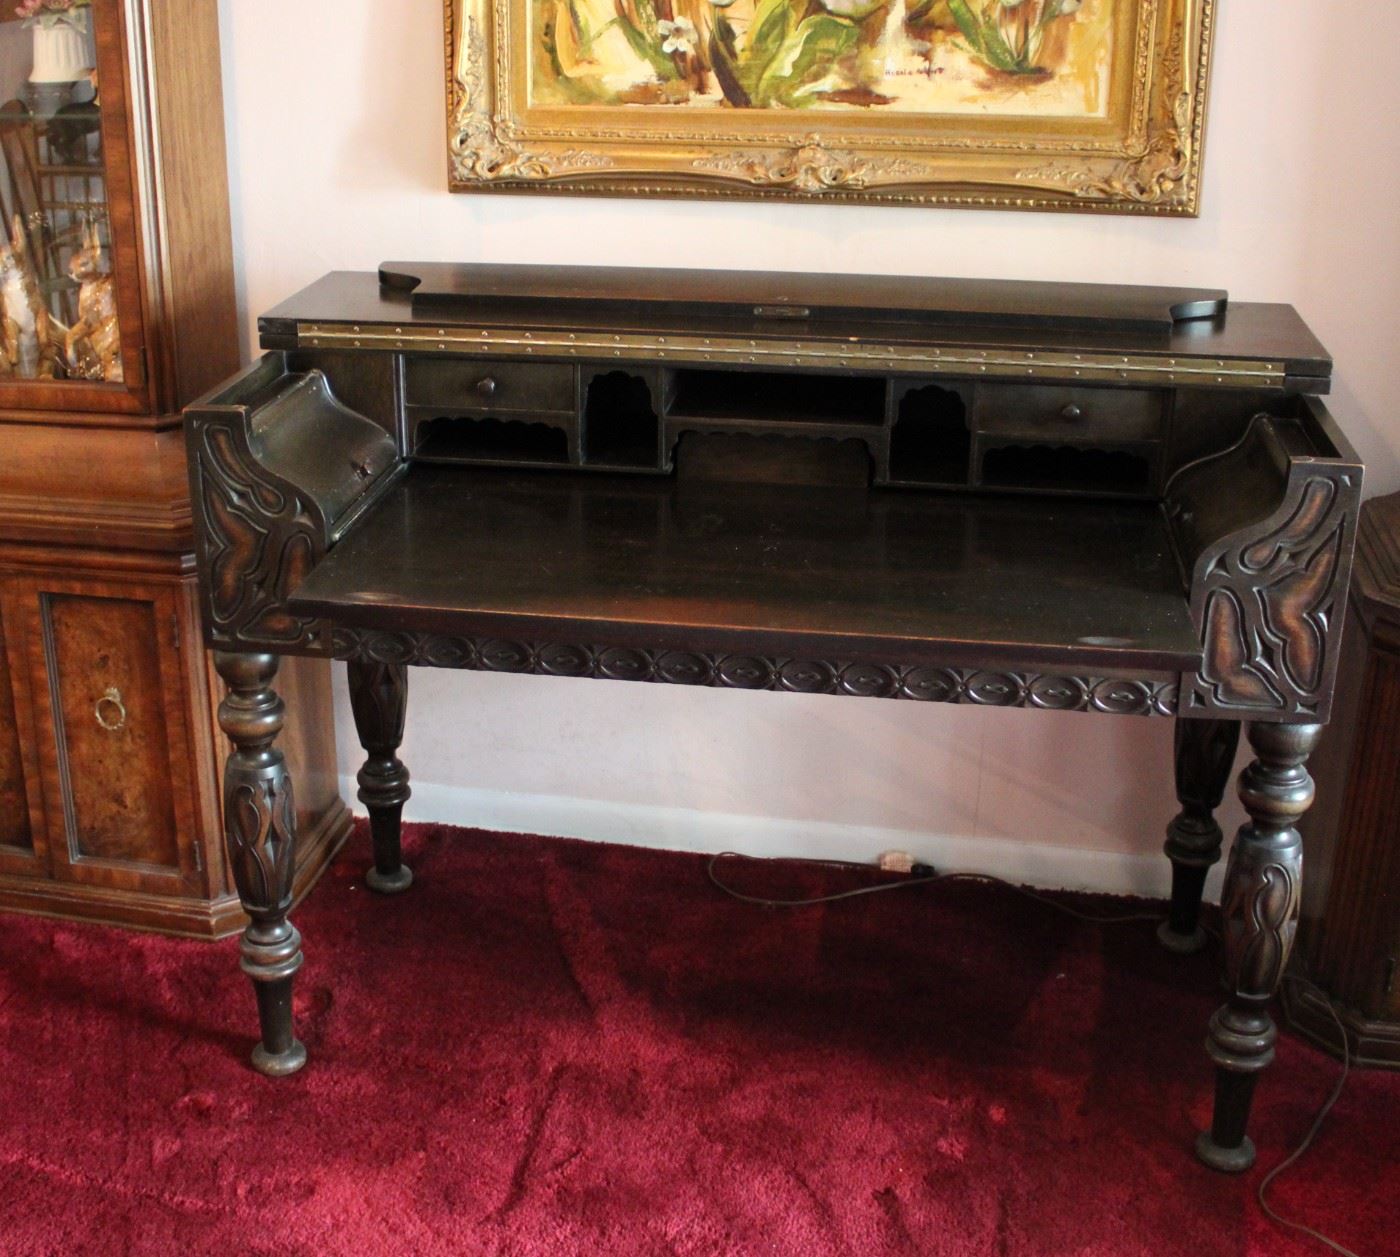 Large antique spinet style writing desk that was a gift to this family from THE Studebaker family, shown here with the lid open